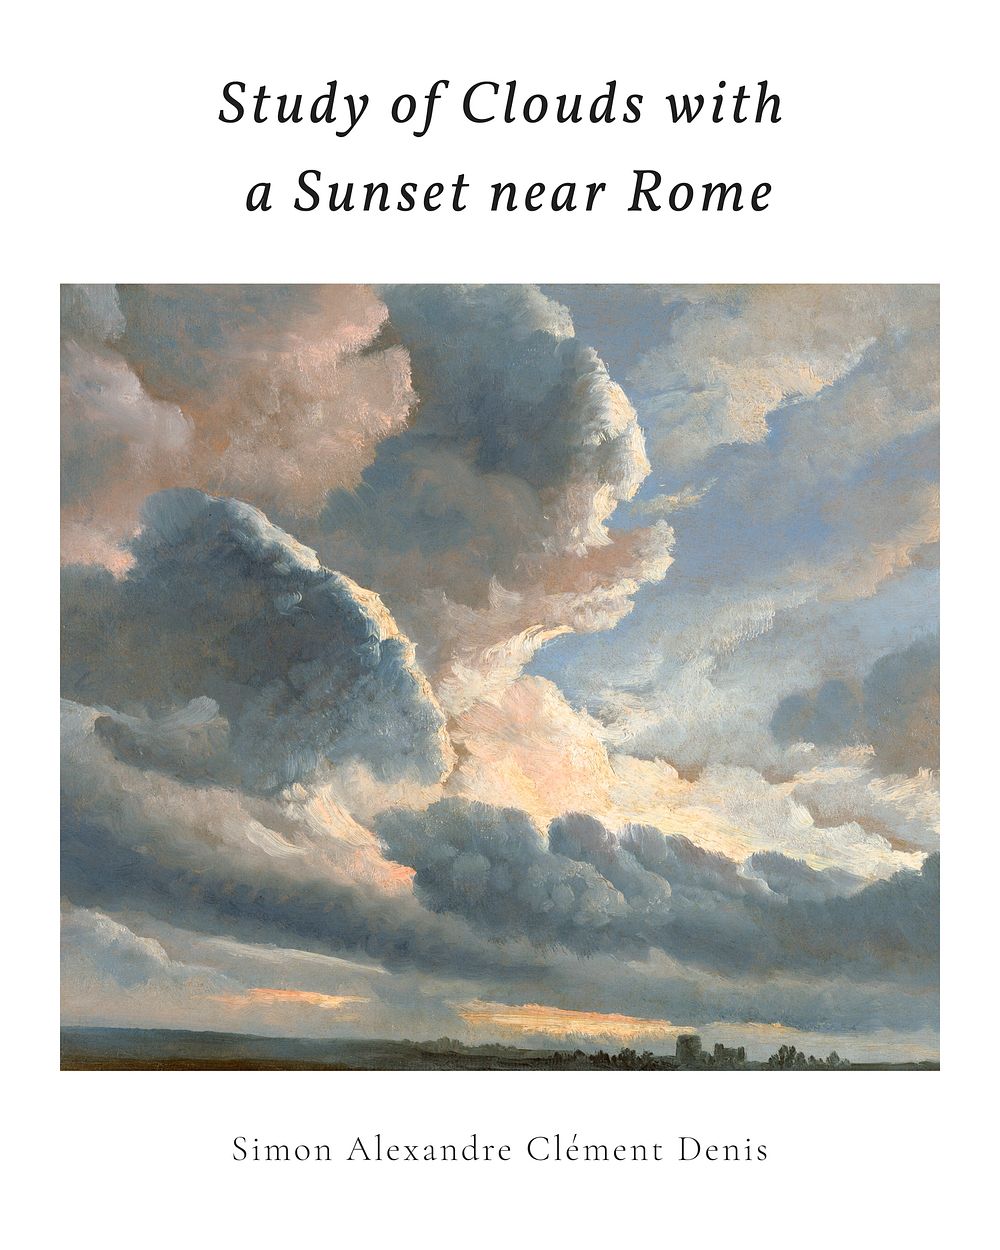 Sunset sky art print painting, Study of clouds and a Sunset near Rome, remixed from the artwork of Simon Alexandre…